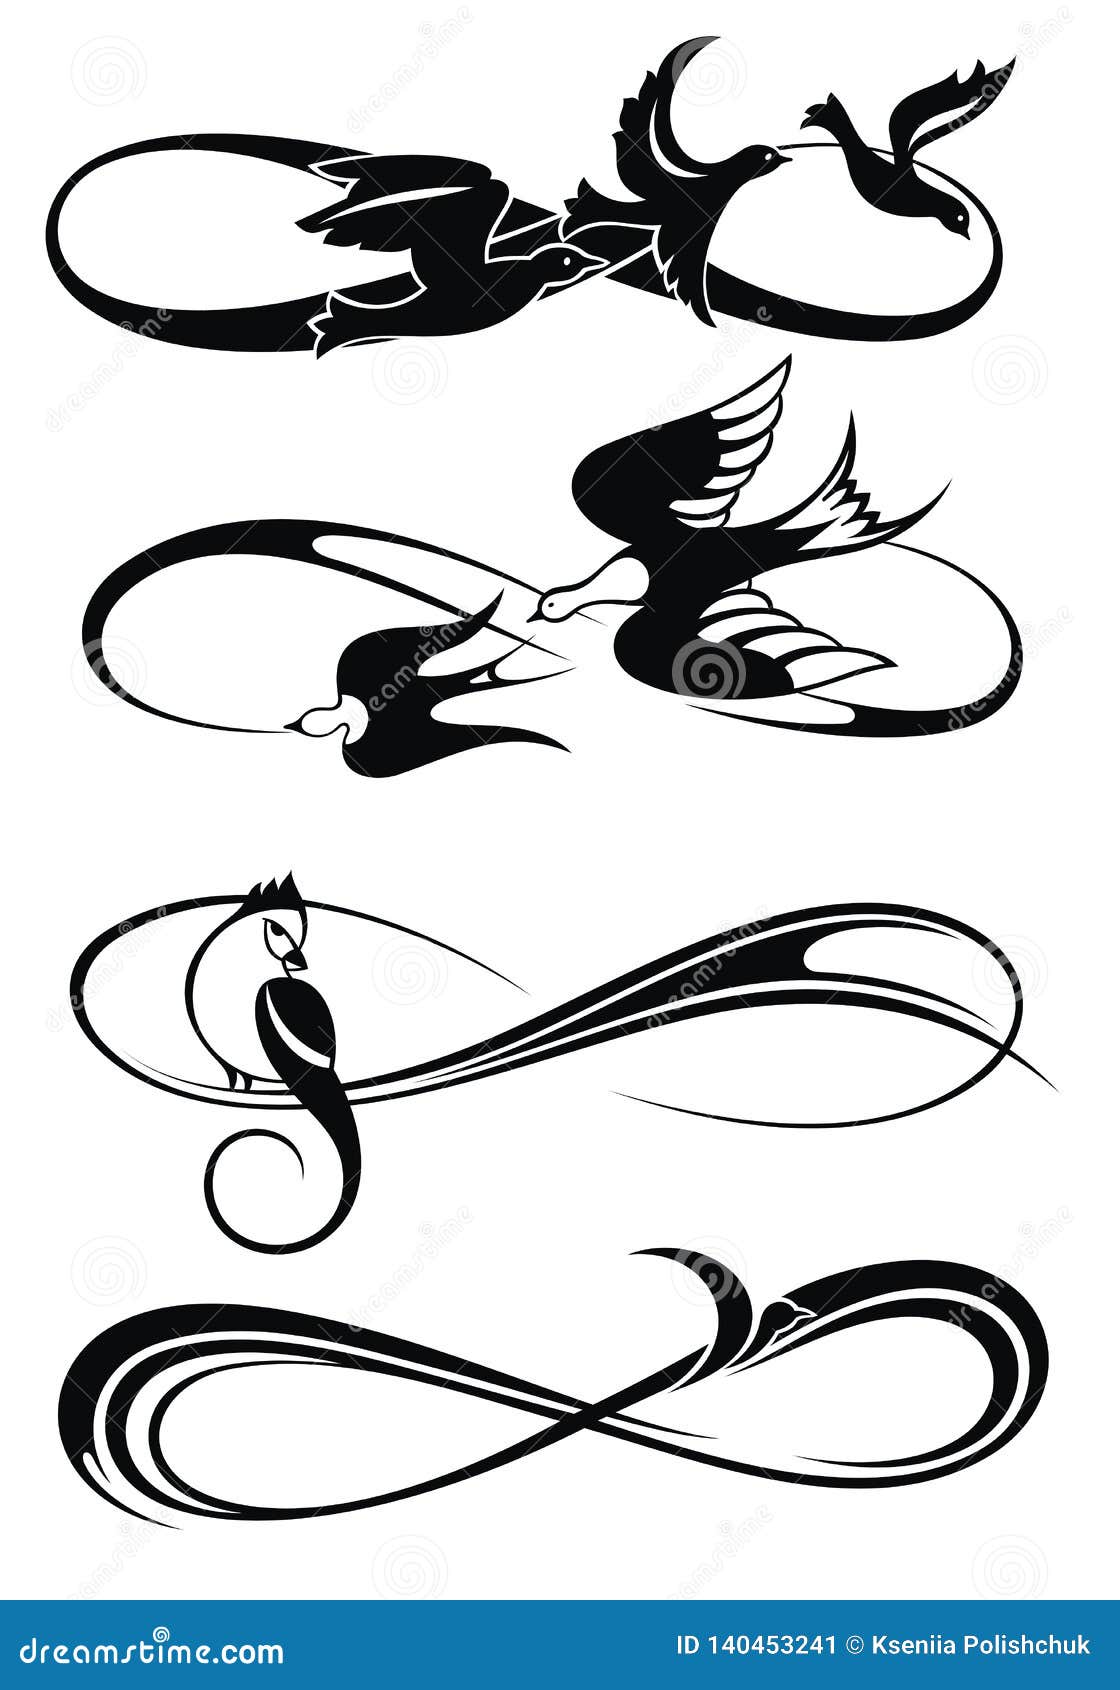 20 Beautiful Infinity Tattoo Designs For Men And Women